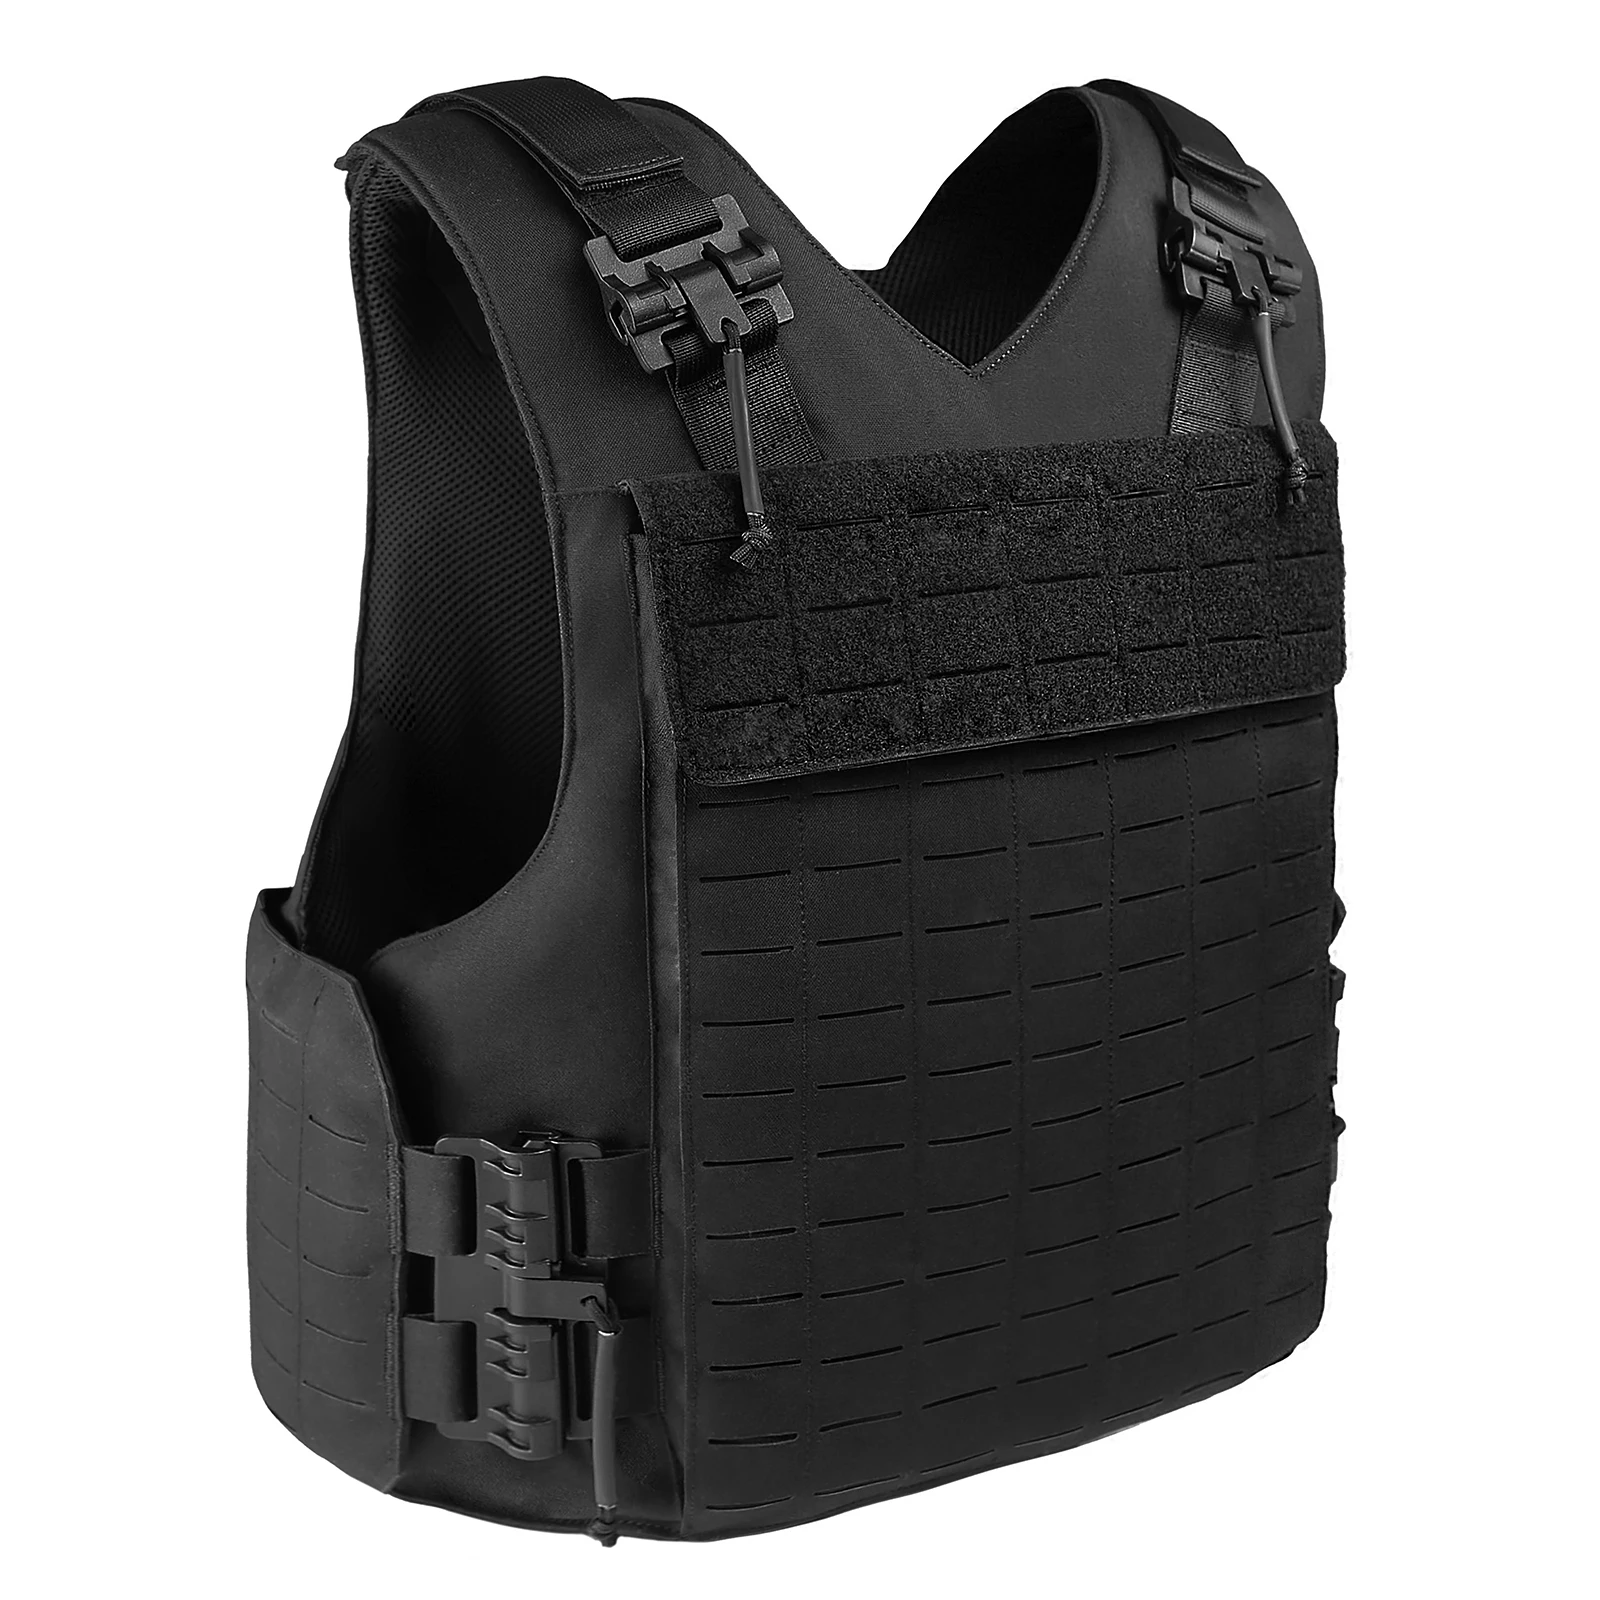 Buffalo Outdoor Laser Cutting Vest Wearproof Tactical Vest Tactical Accessories Birthday Gift Drop Shipping - Black